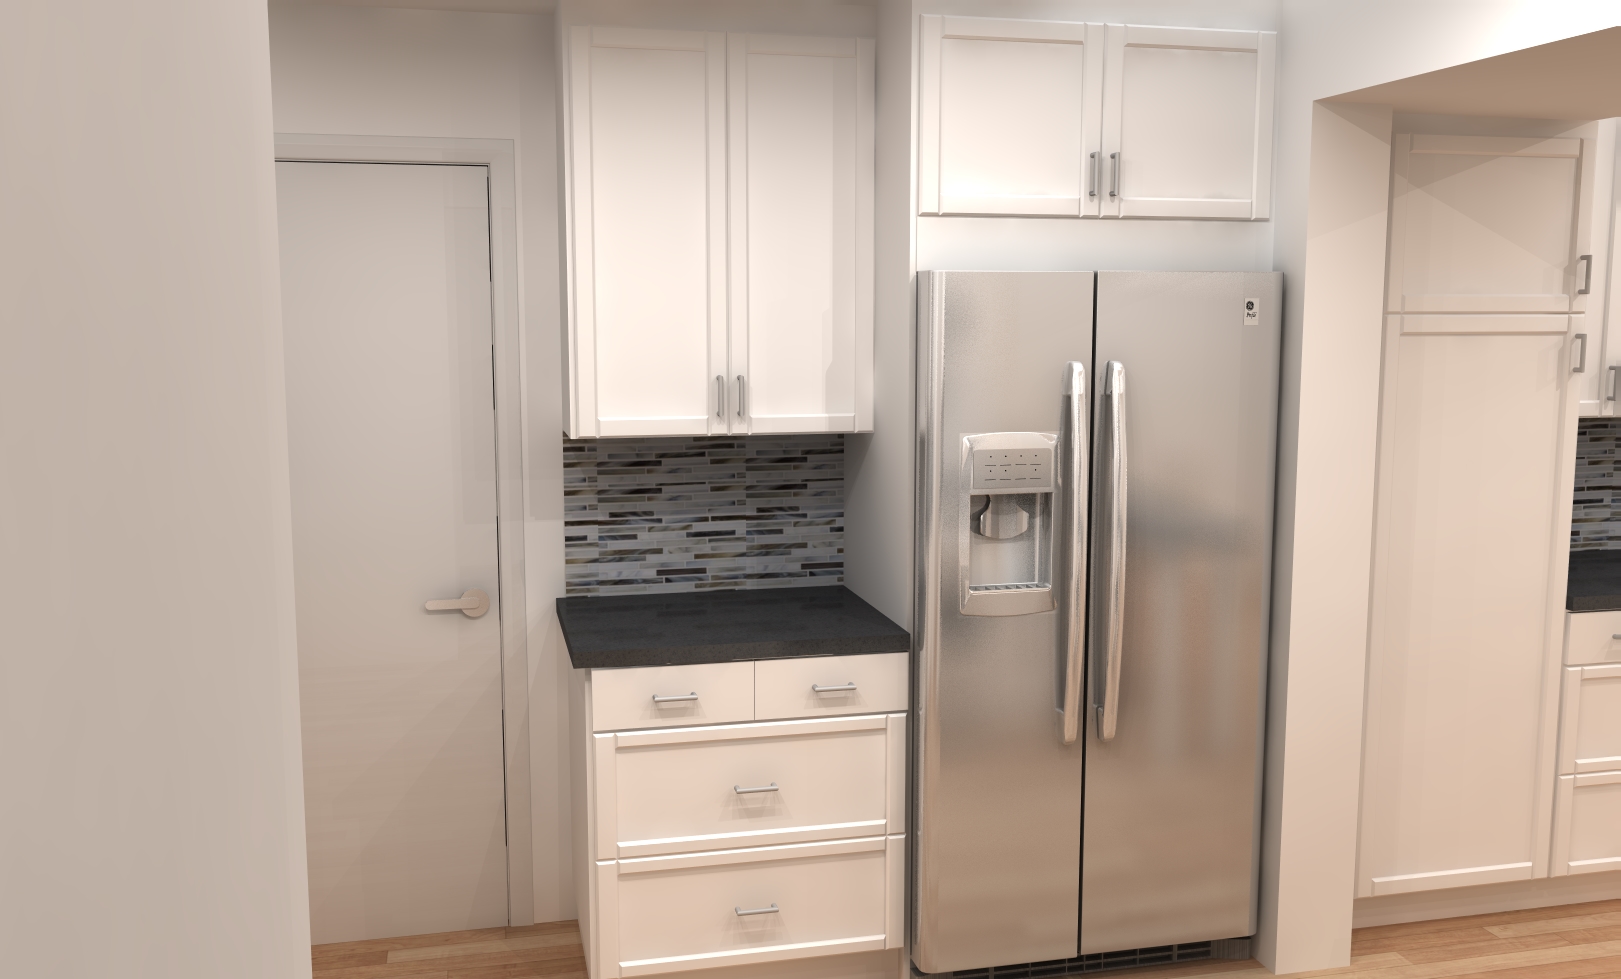 Small Kitchen Remodel With Ikea Cabinets